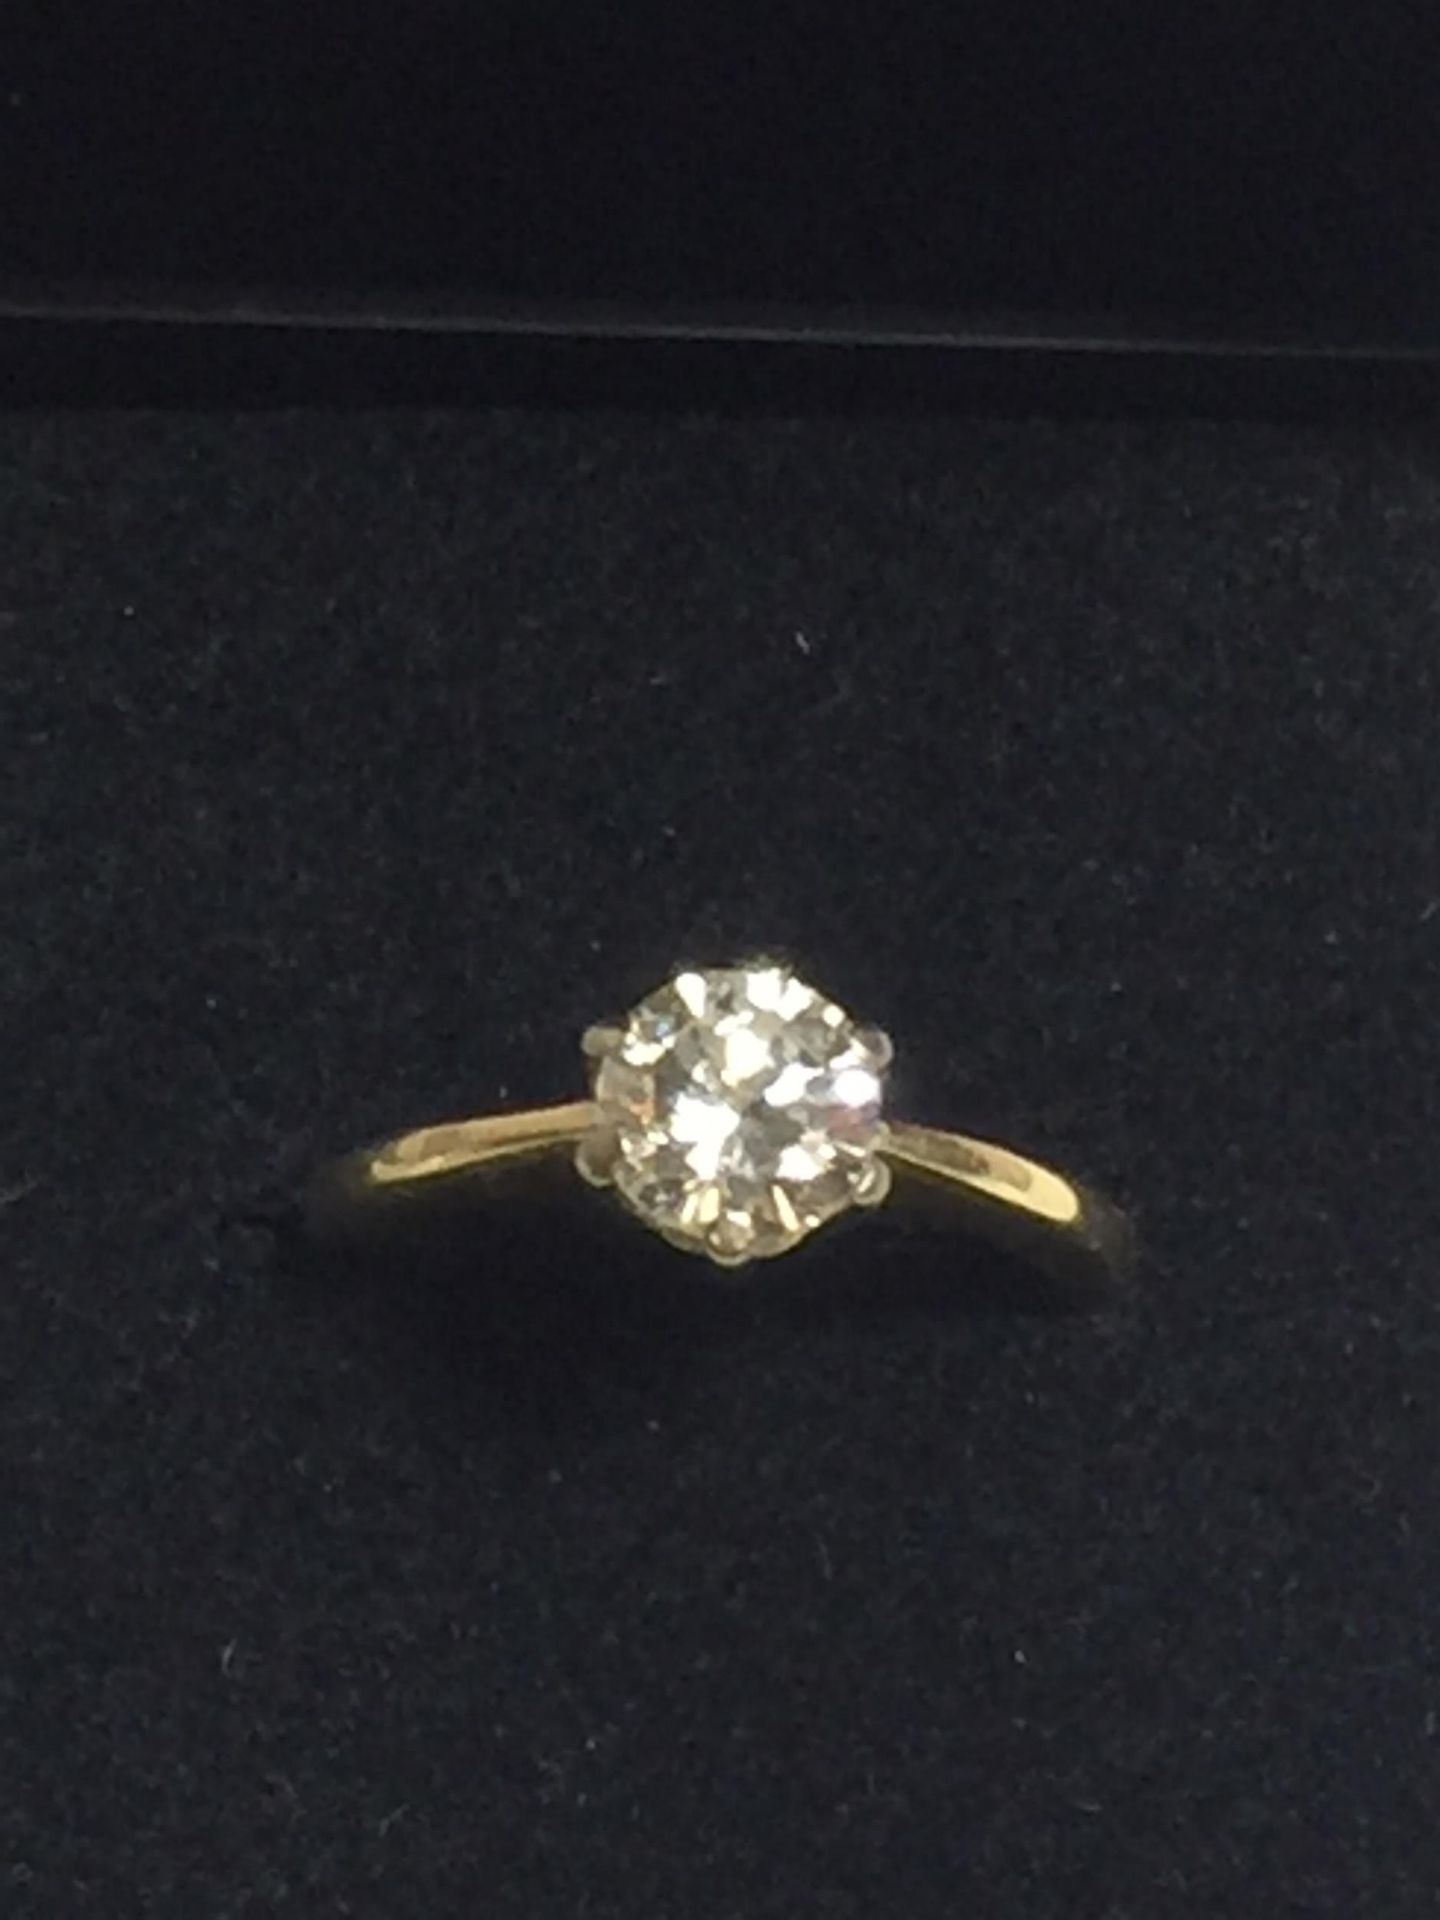 AN 18CT GOLD DIAMOND SOLITAIRE WITH 1 CARAT (APPROX) DIAMOND, SIZE K AND A HALF